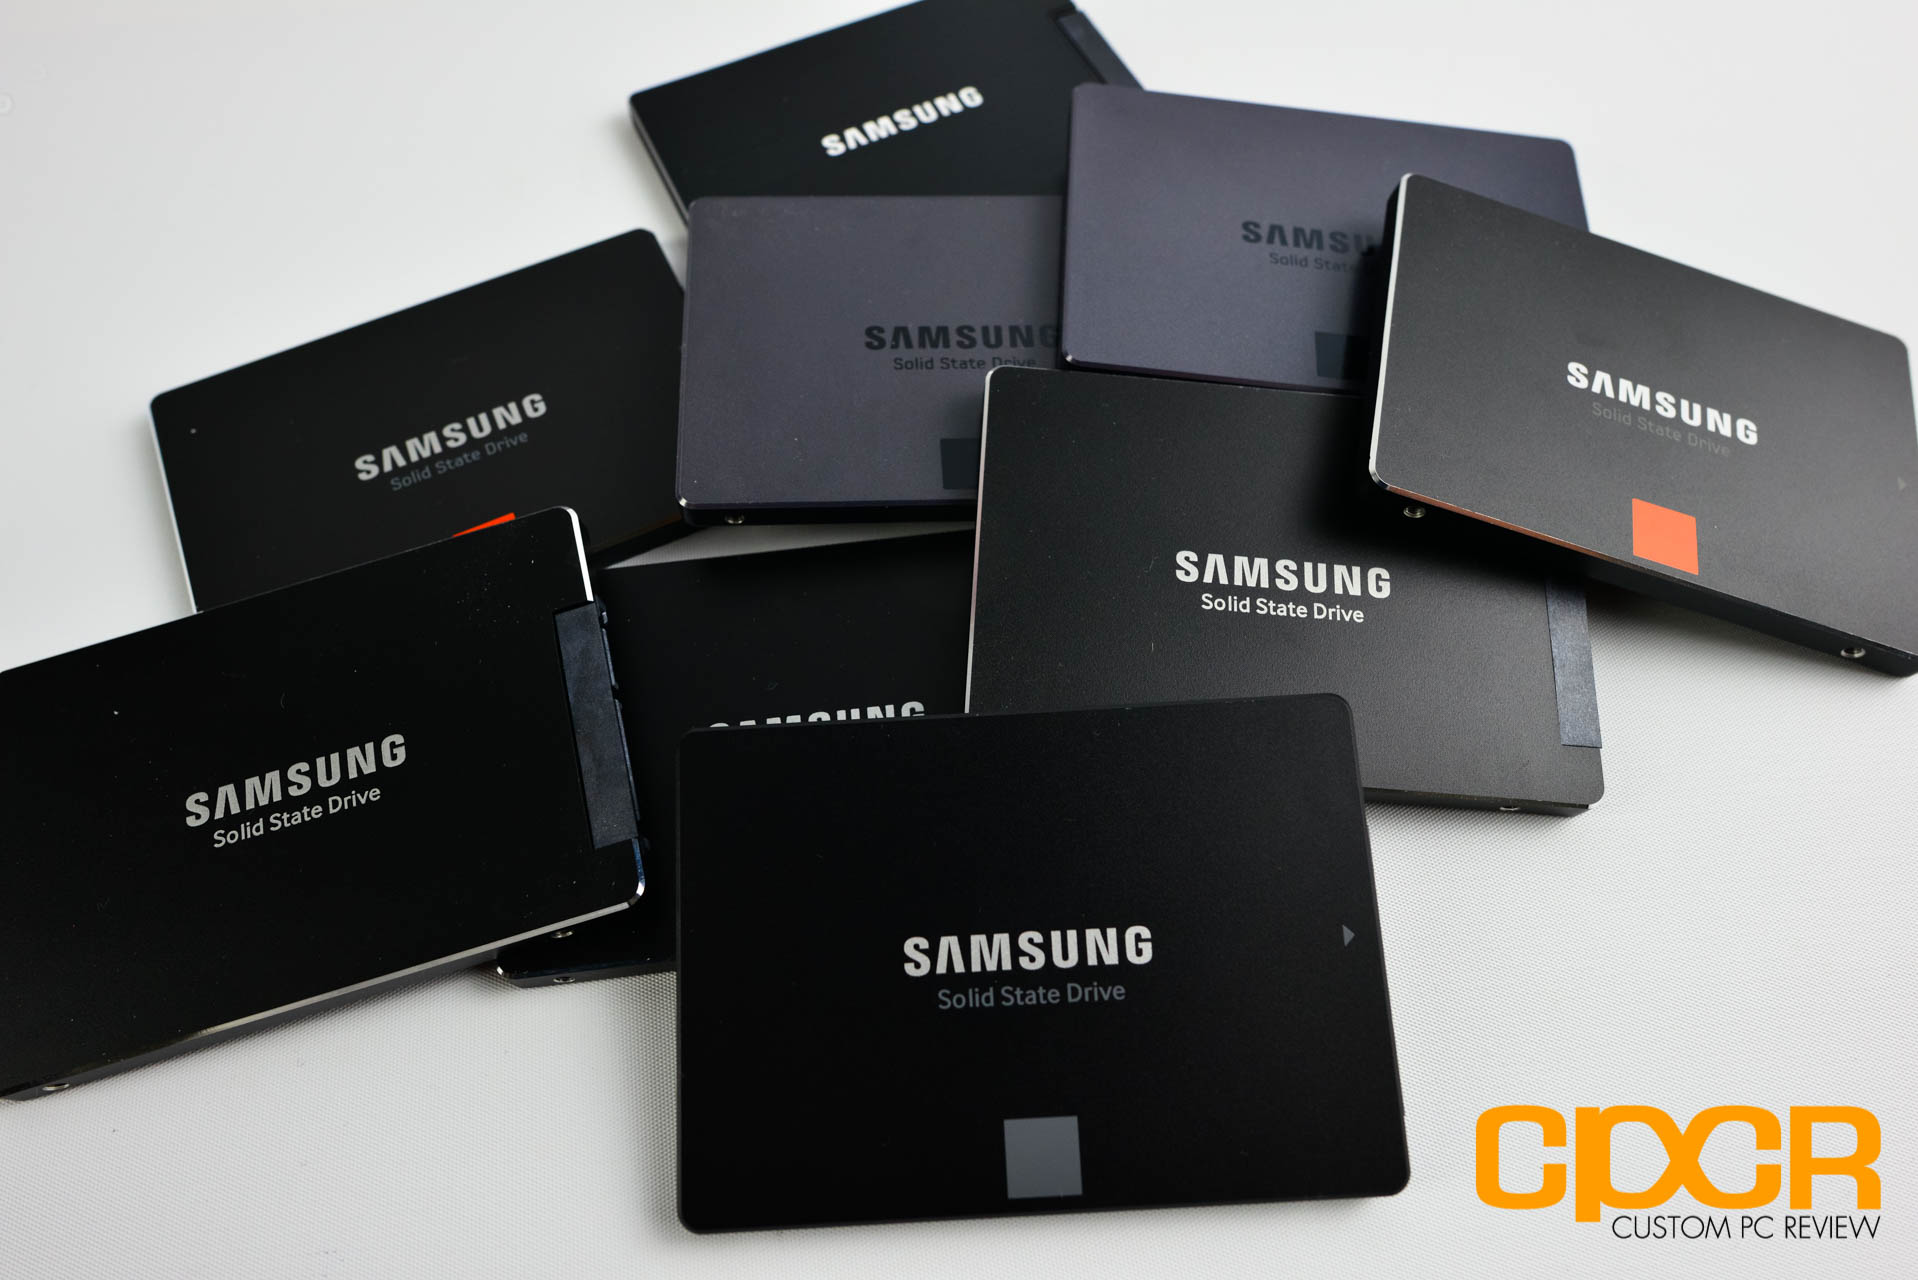 6 Reasons Why You Should Buy a SSD If You Don’t Own One Already